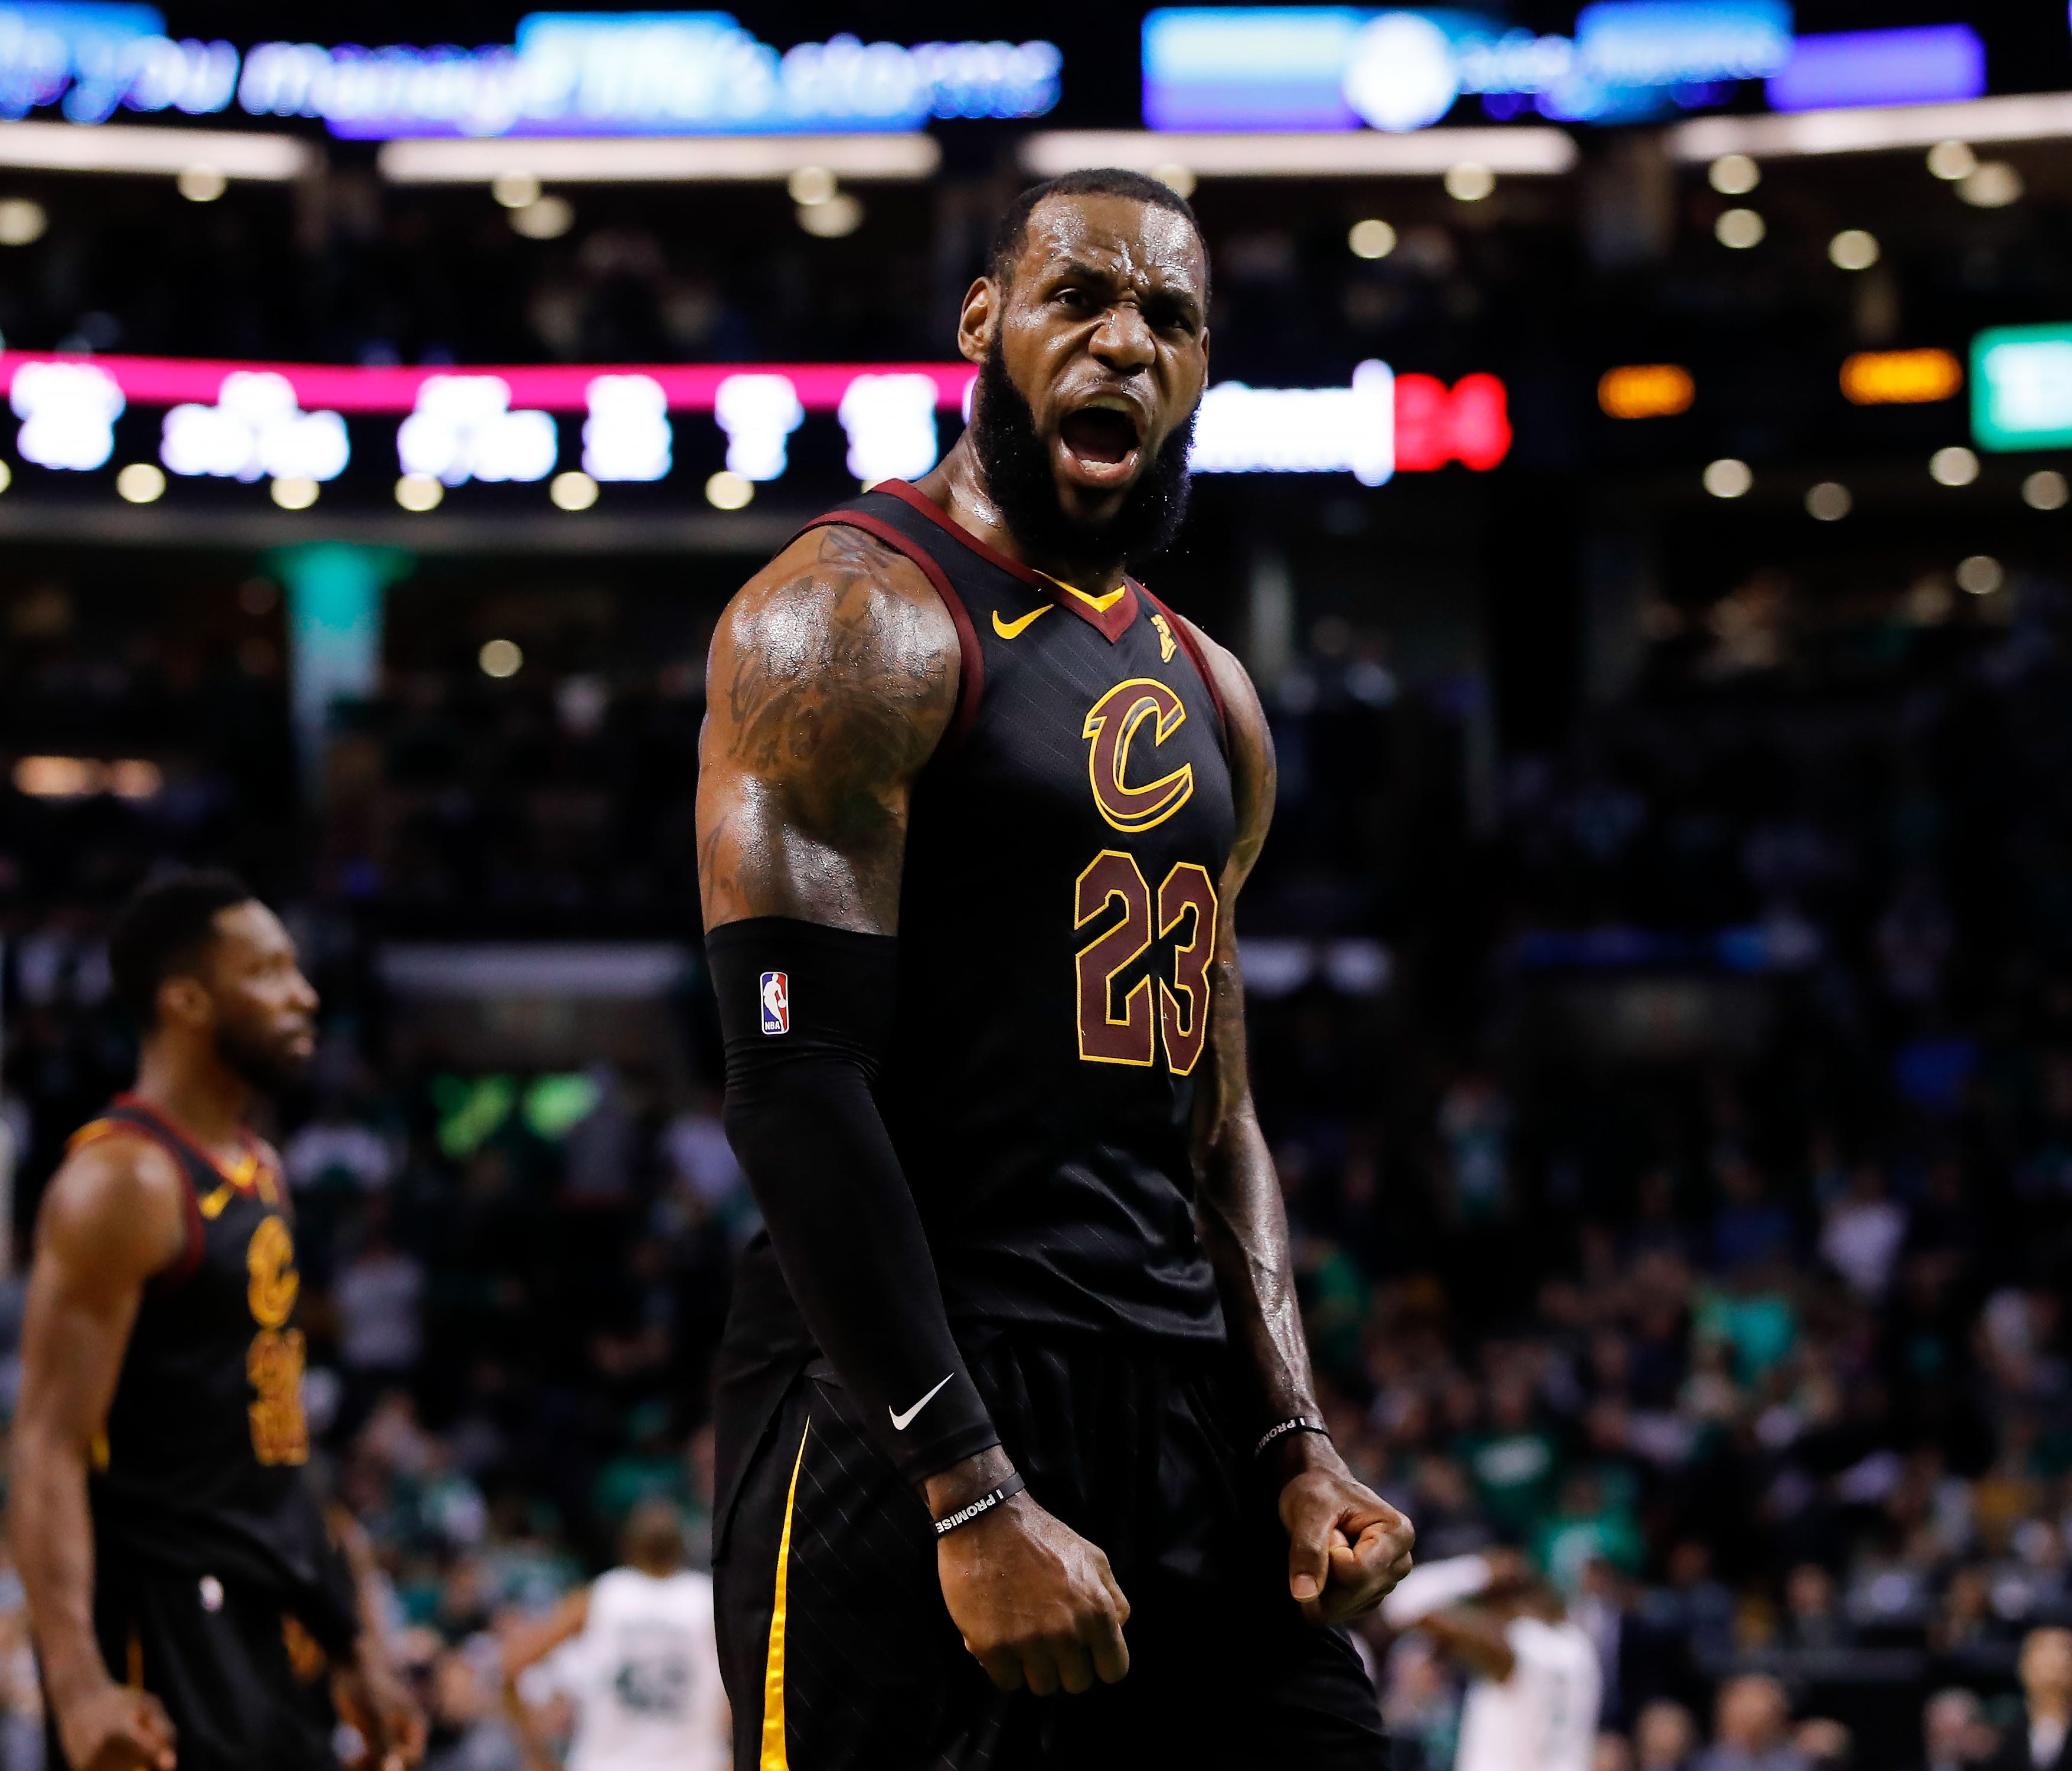 Cleveland Cavaliers forward LeBron James (23) celebrates after drawing foul against the Boston Celtics during the fourth quarter in game seven of the Eastern conference finals of the 2018 NBA Playoffs at TD Garden.